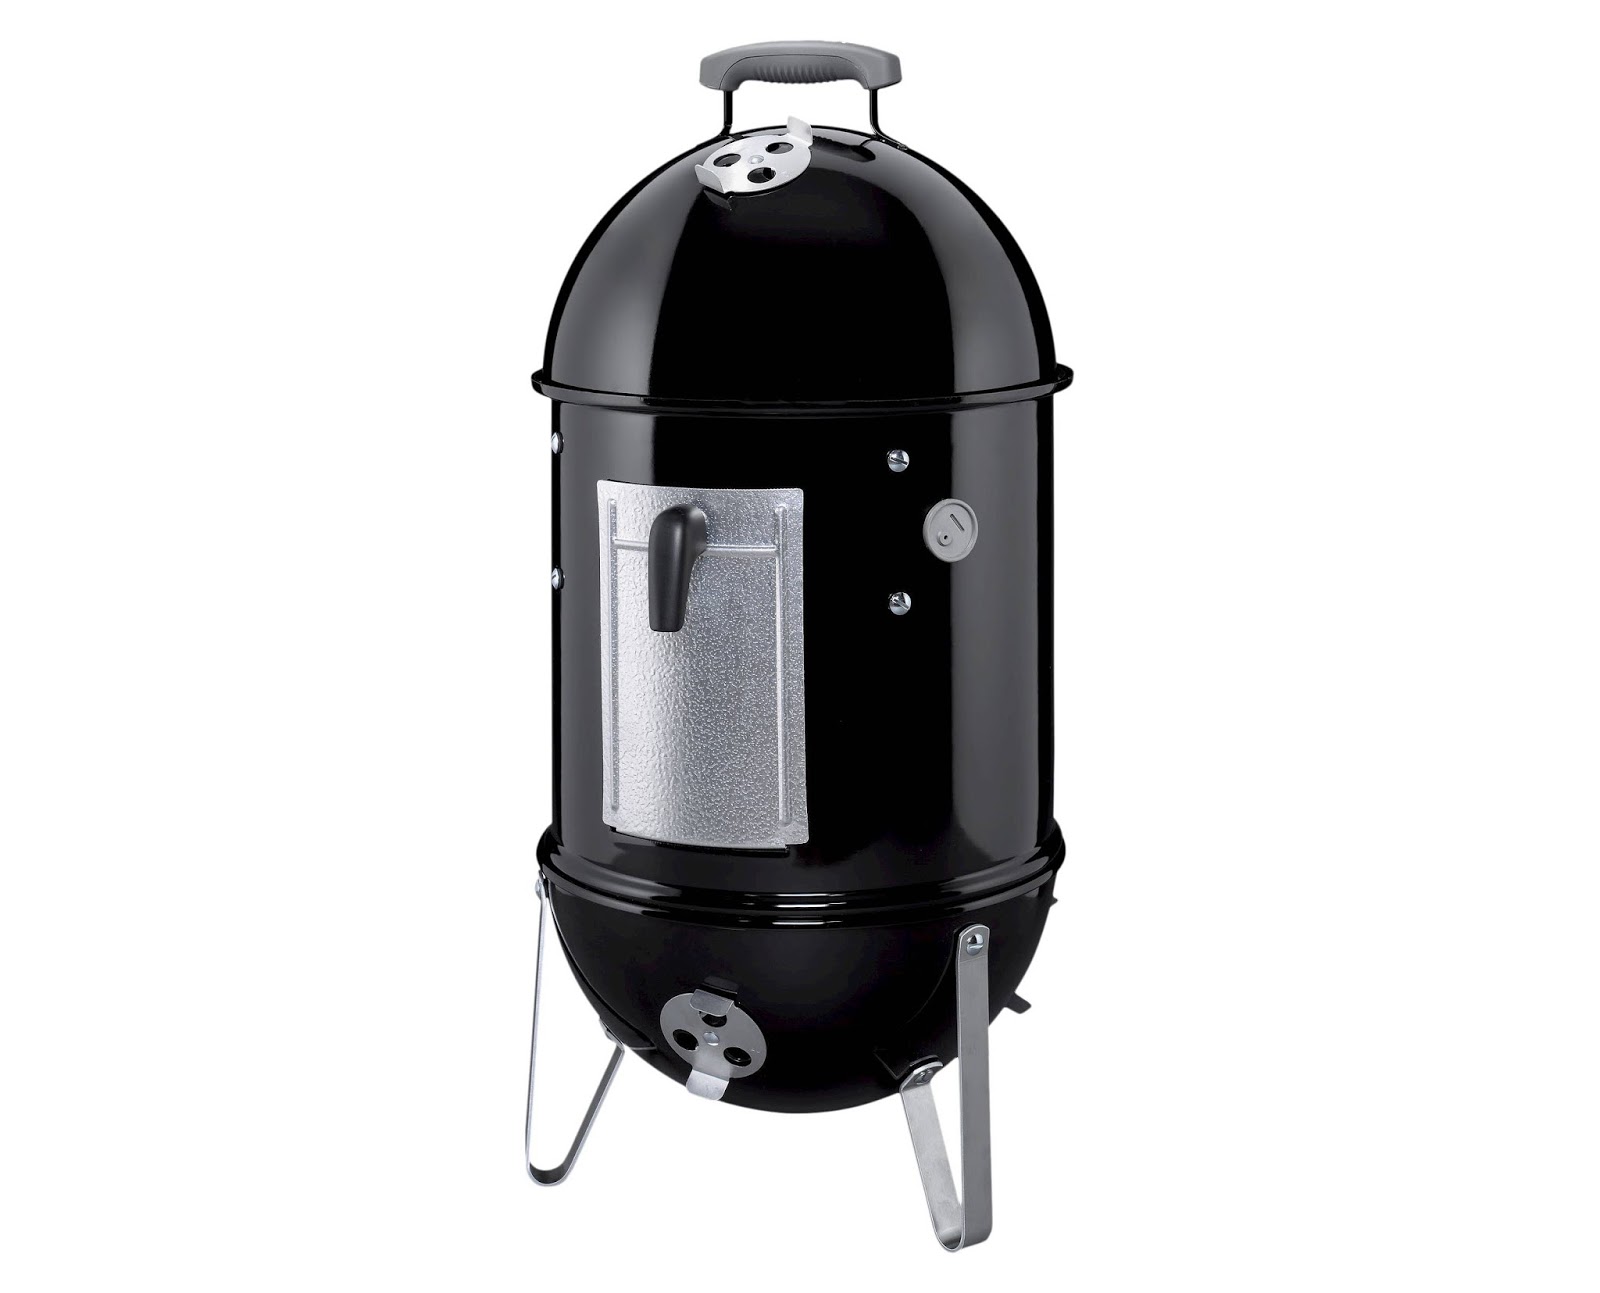 "The Way I See It": Weber Smokey Mountain Cooker